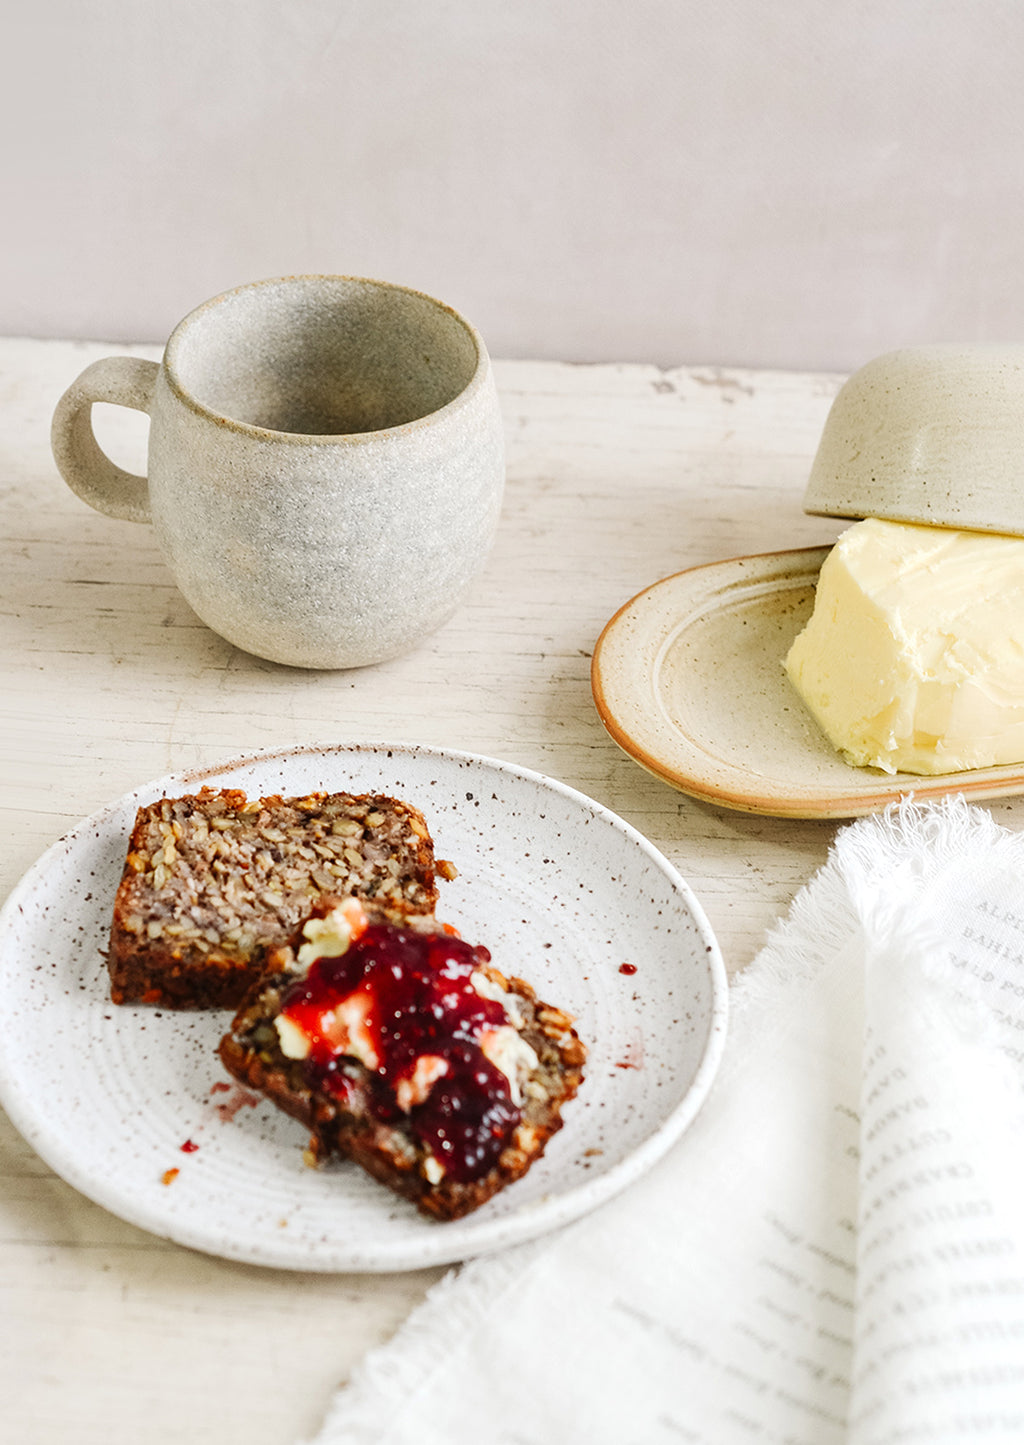 2: A breakfast tableware scene with coffee mug, butter dish and toast and jam on a ceramic plate.